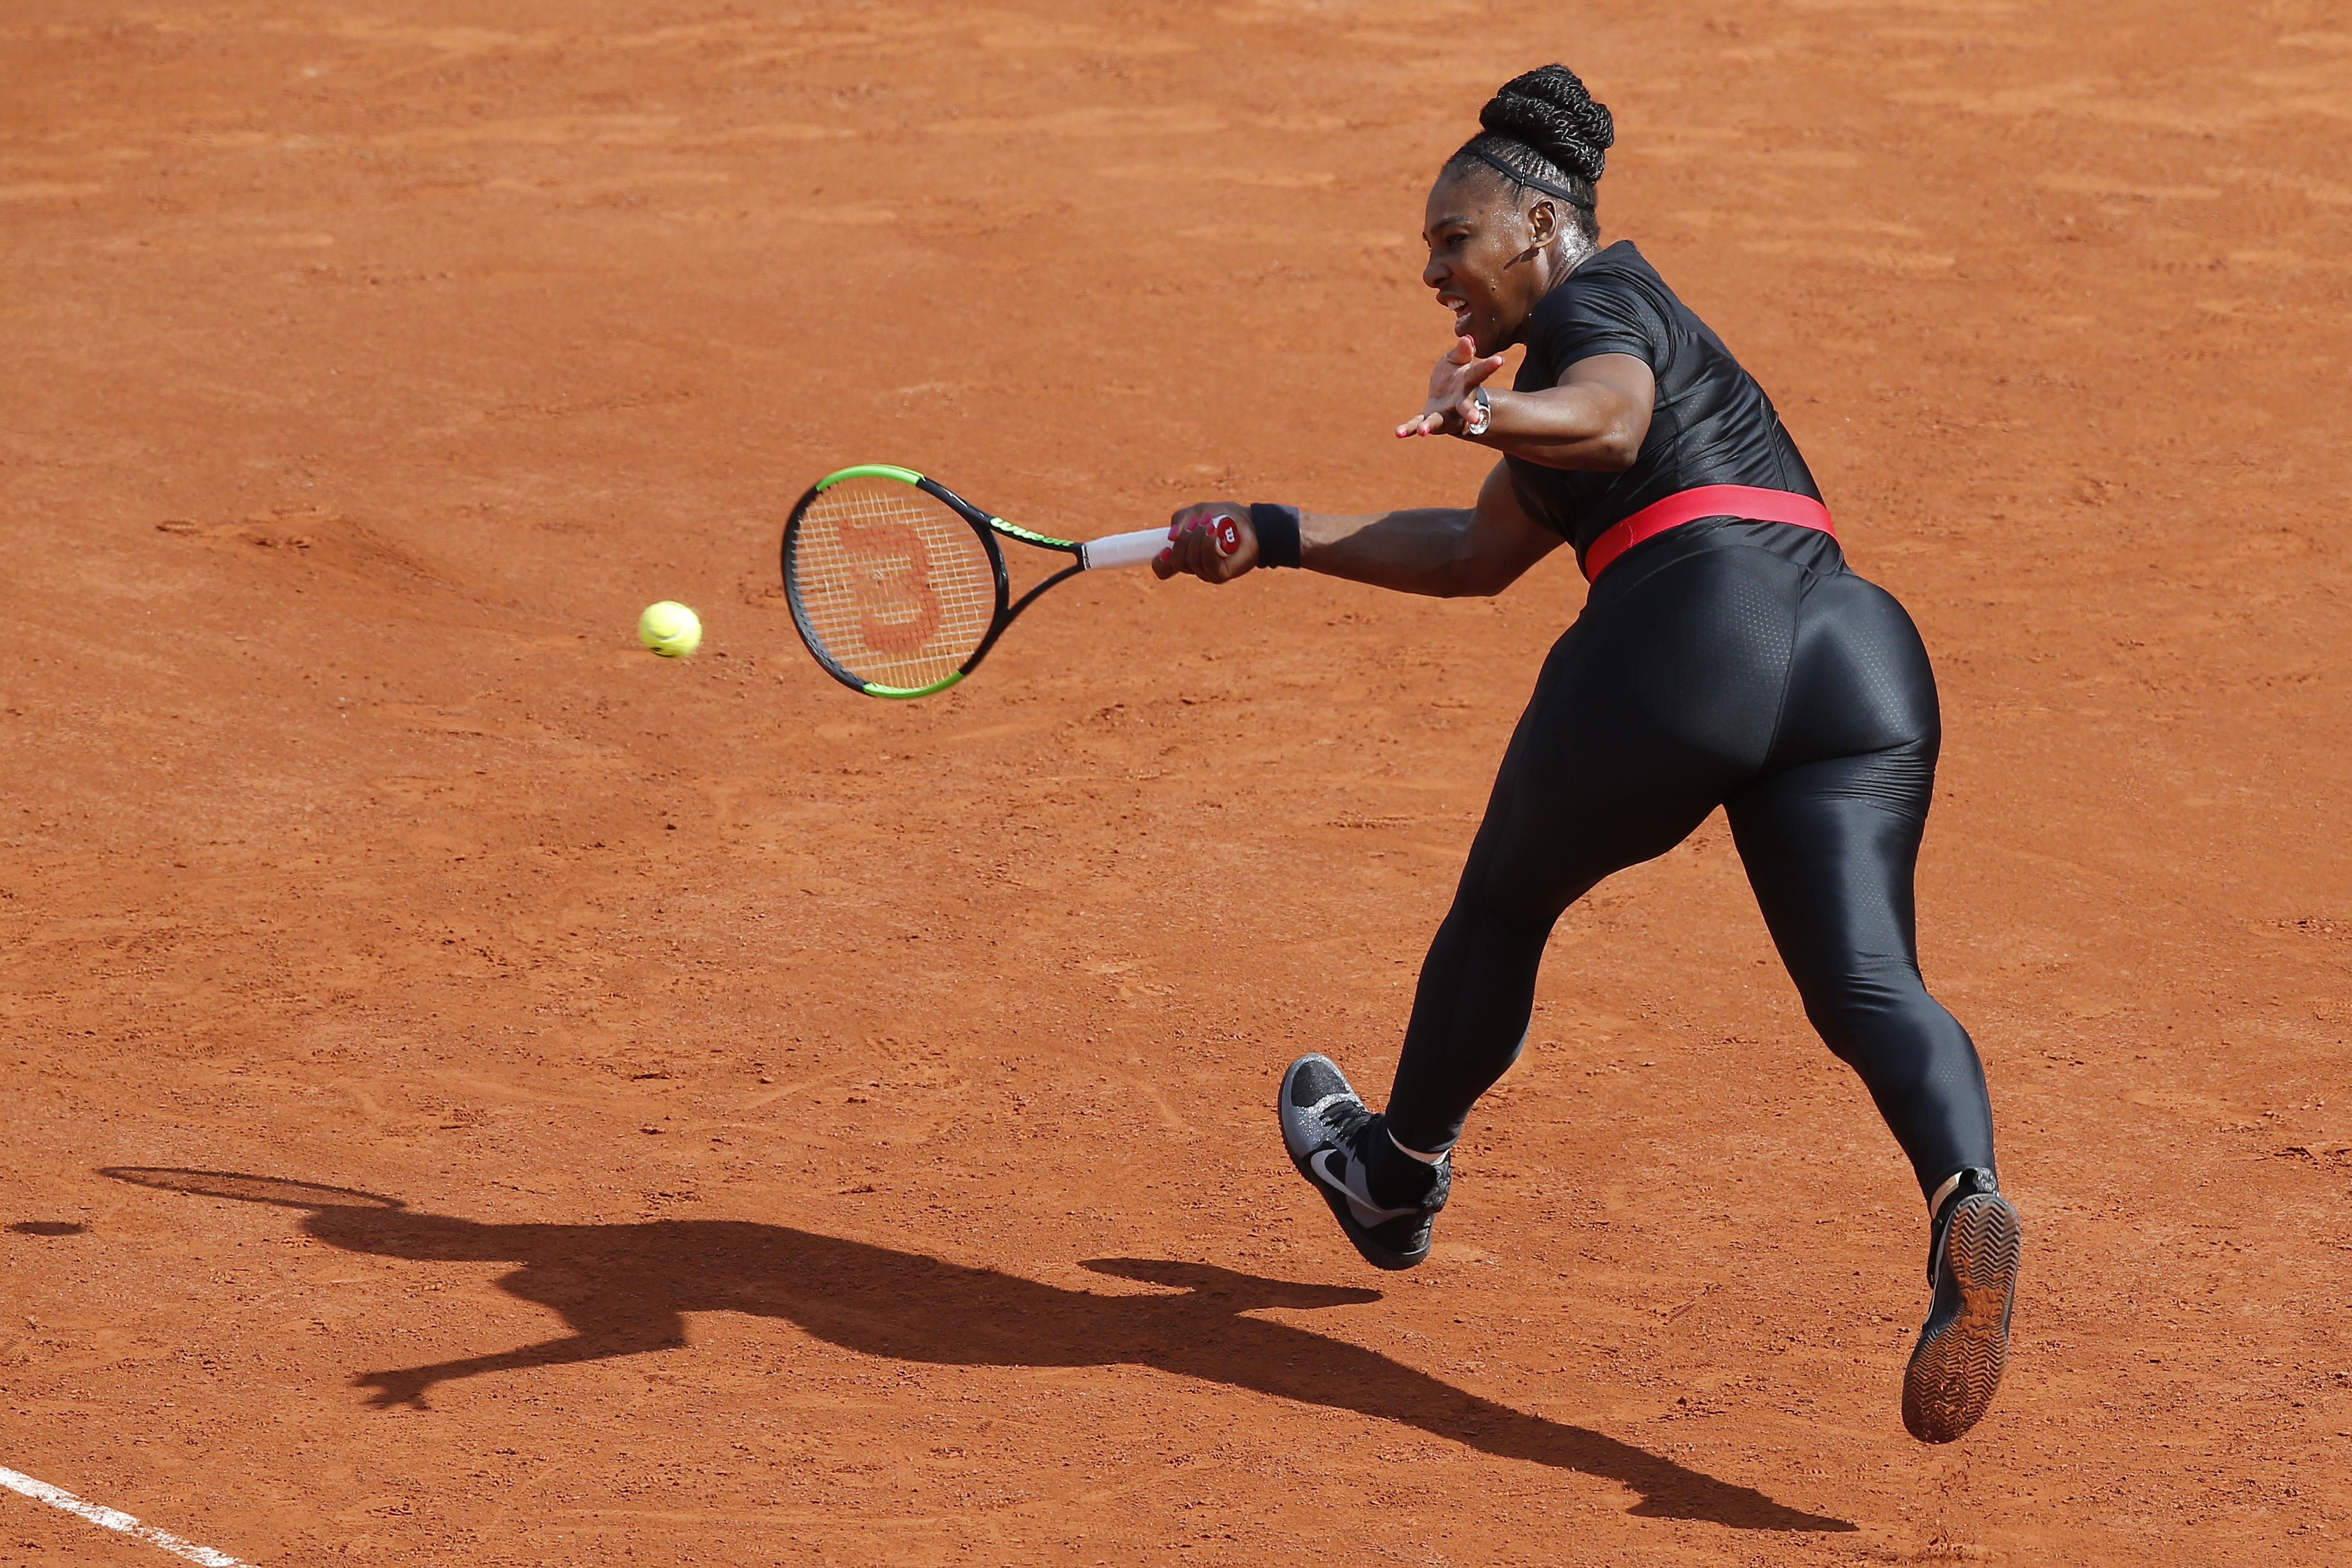 French Open says ‘Non!’ to Serena Williams’ black catsuit | The Spokesman-Review